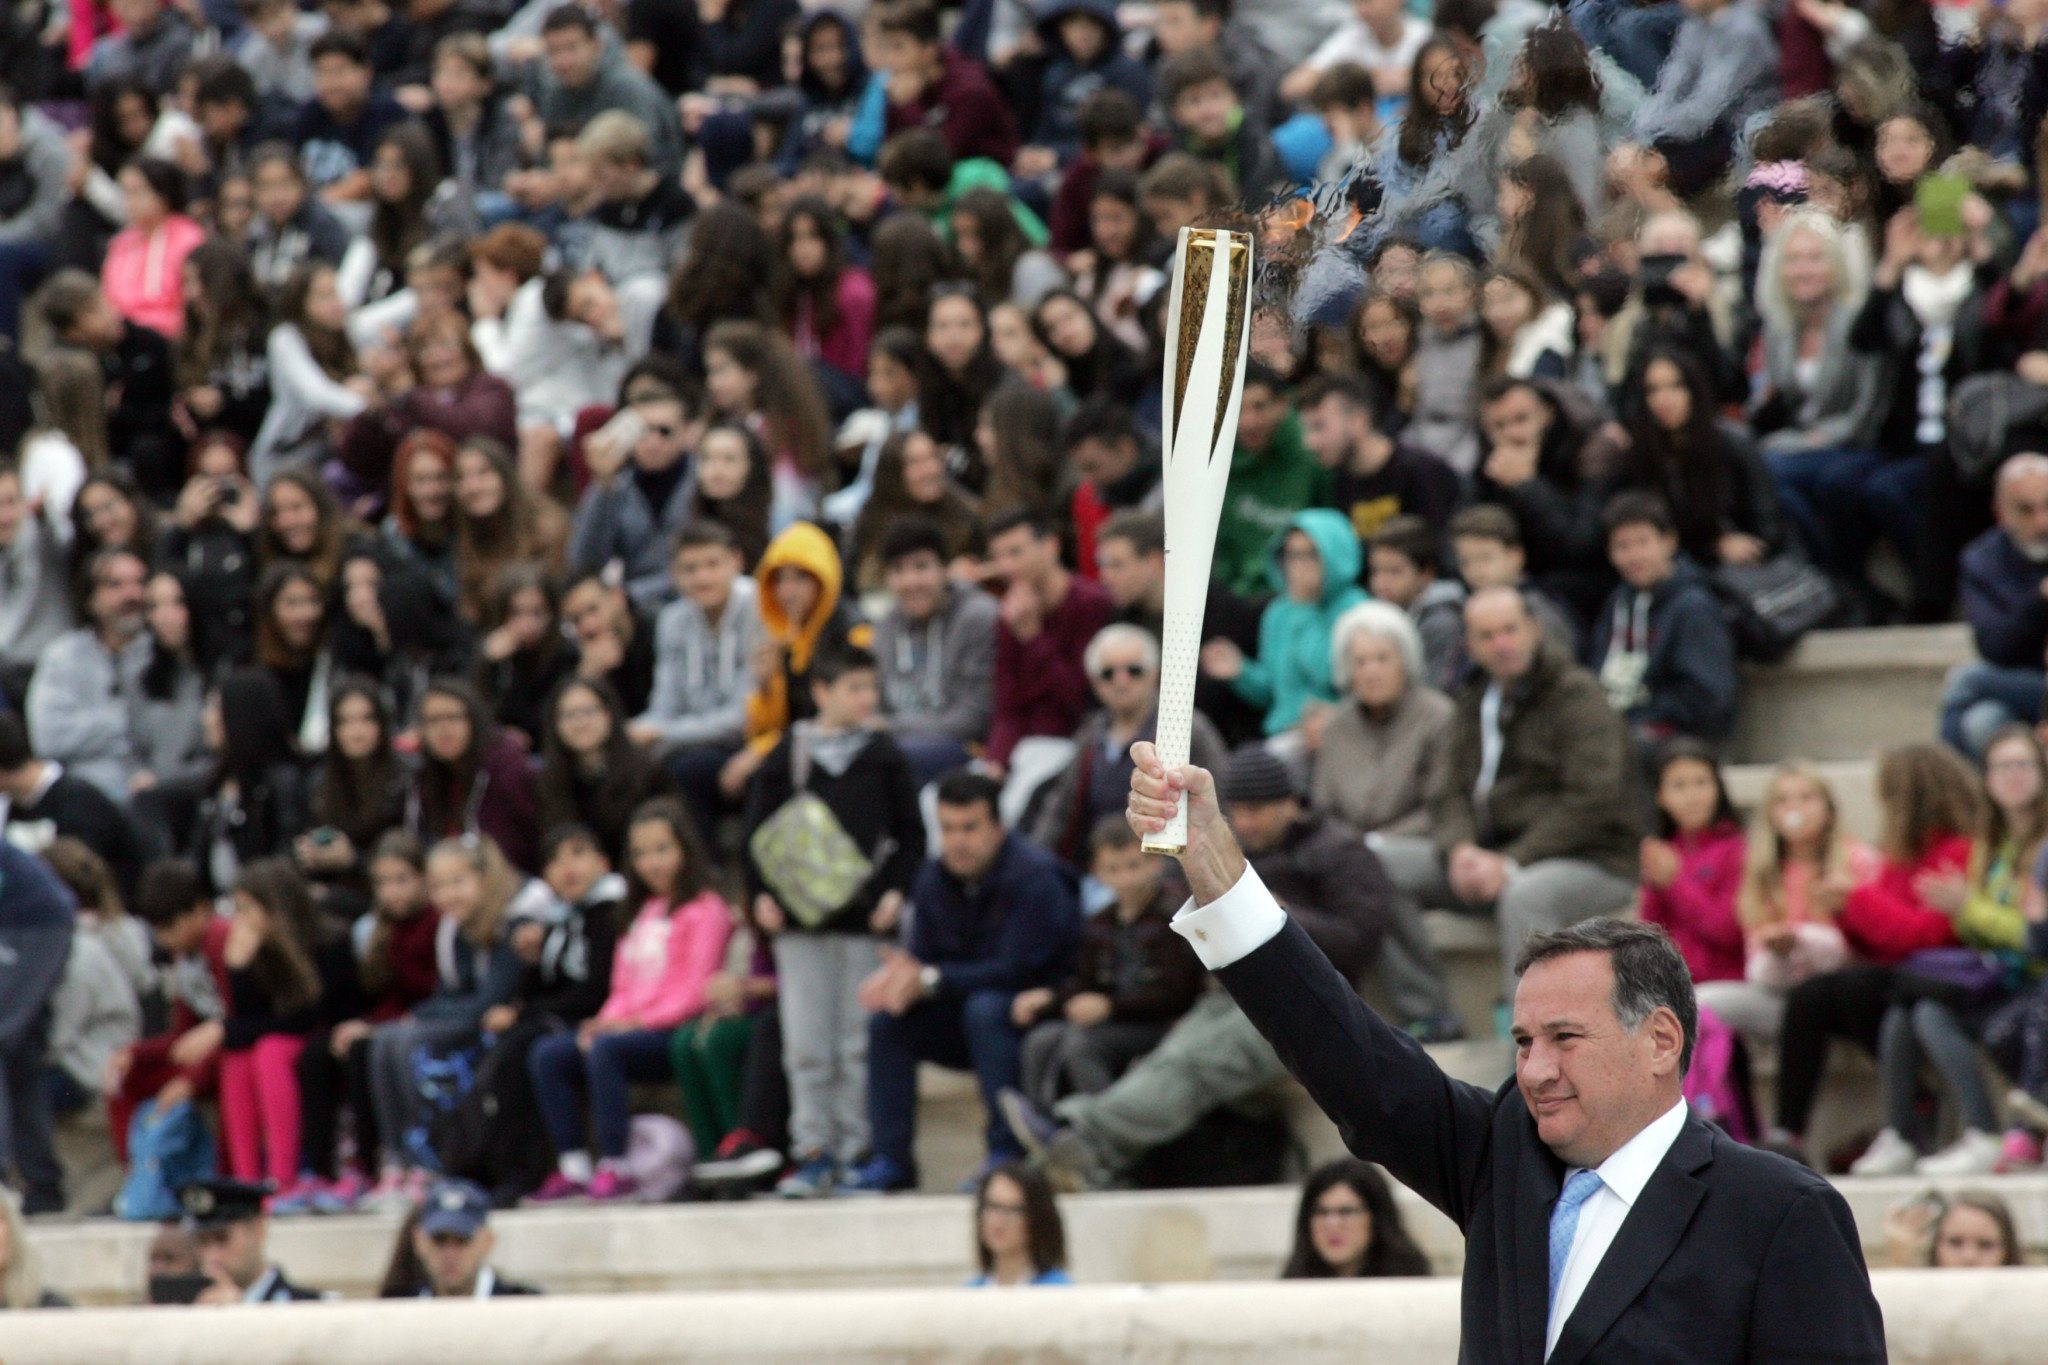 Greek Olympic Committee President Spyros Kapralos holds a Torch aloft during today's ceremony ©Getty Images